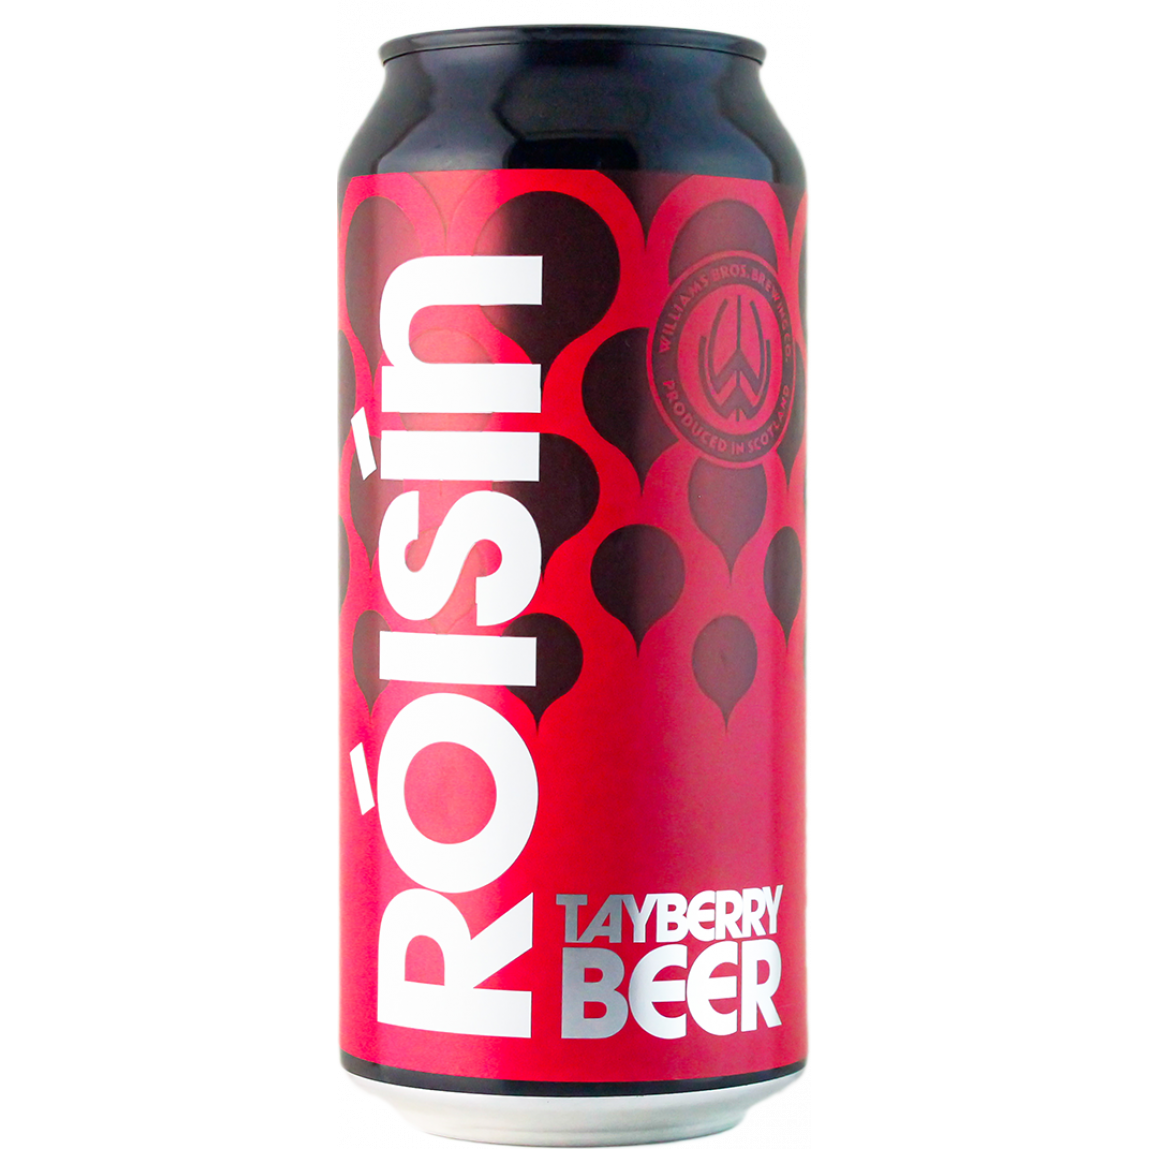 Williams Brothers Róisin - Tayberry Beer 440ml Can-Scottish Beers-5034743202471-Fountainhall Wines